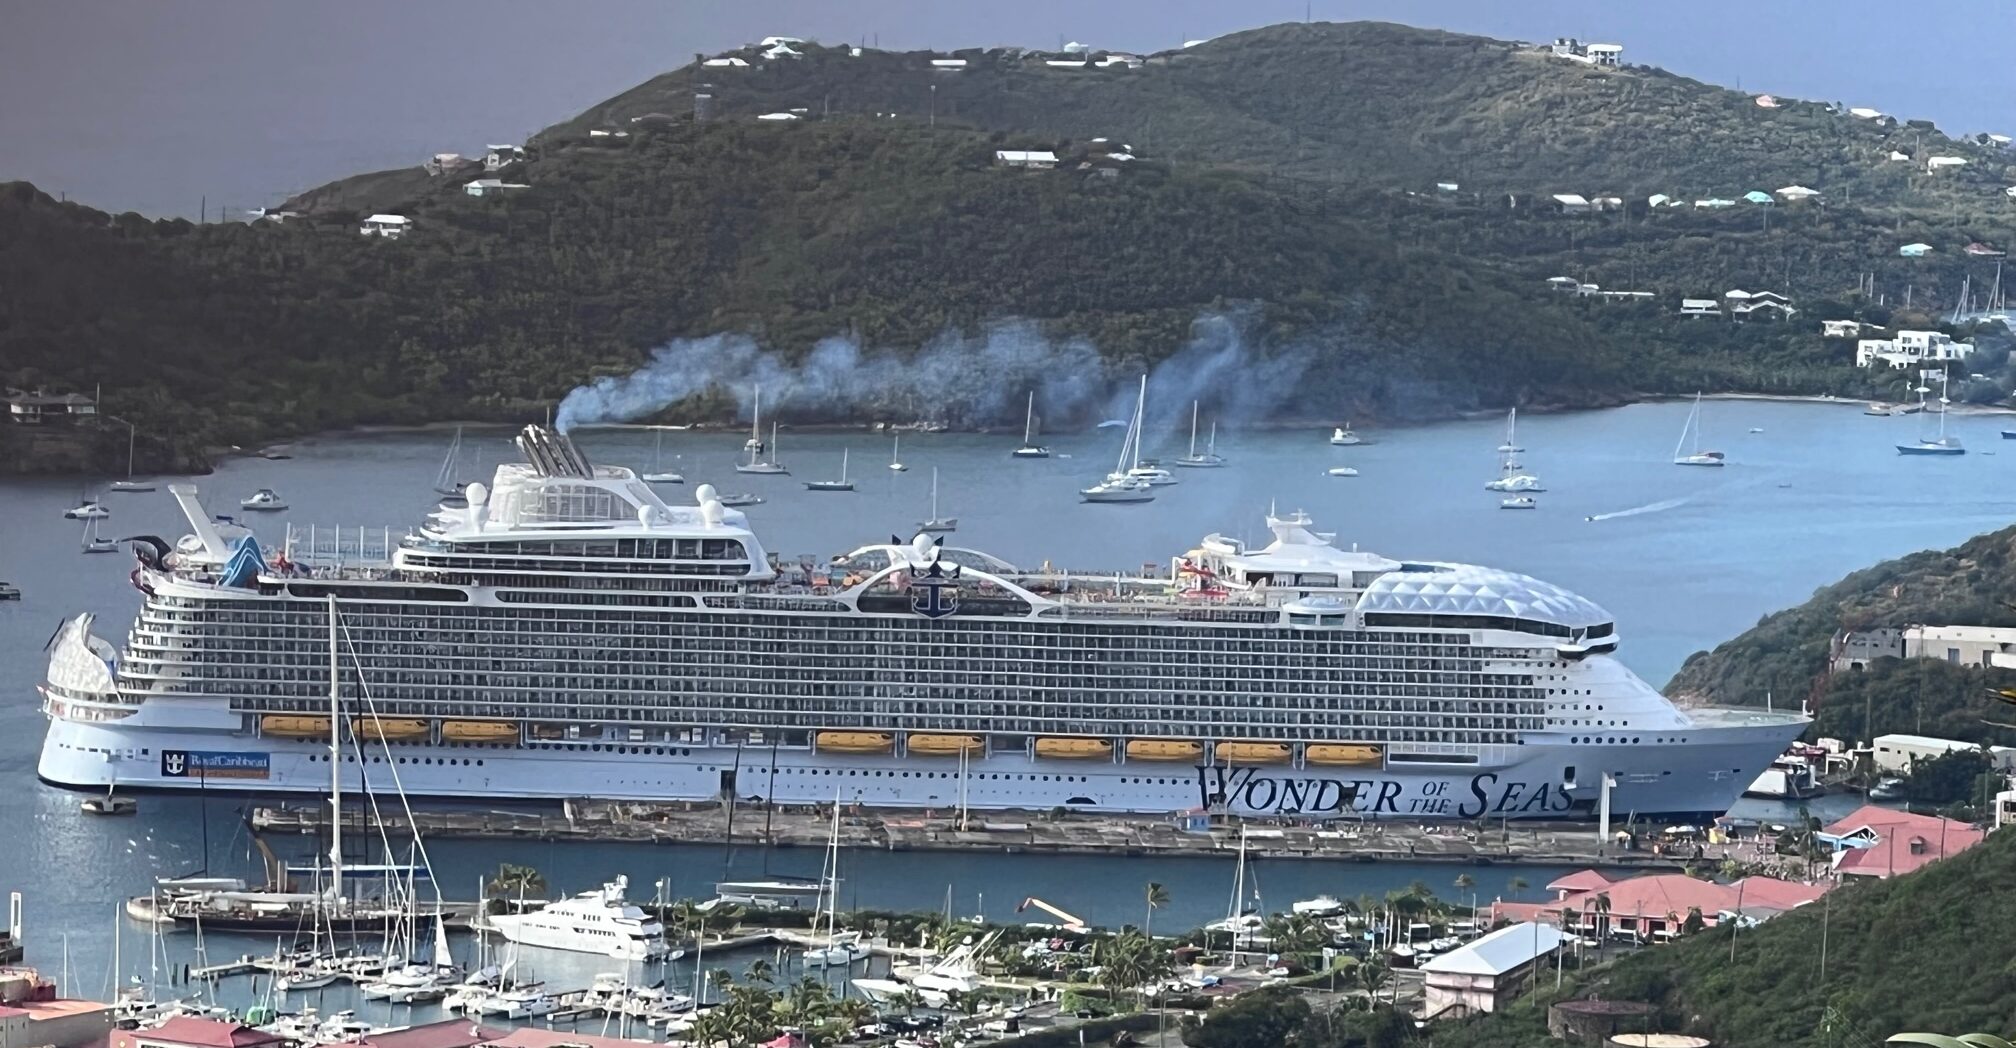 The massive Wonder of the Seas makes it safely to the dock Tuesday for its inaugural call on Crown Bay, St. Thomas. (Source photo by Michele Weichman)